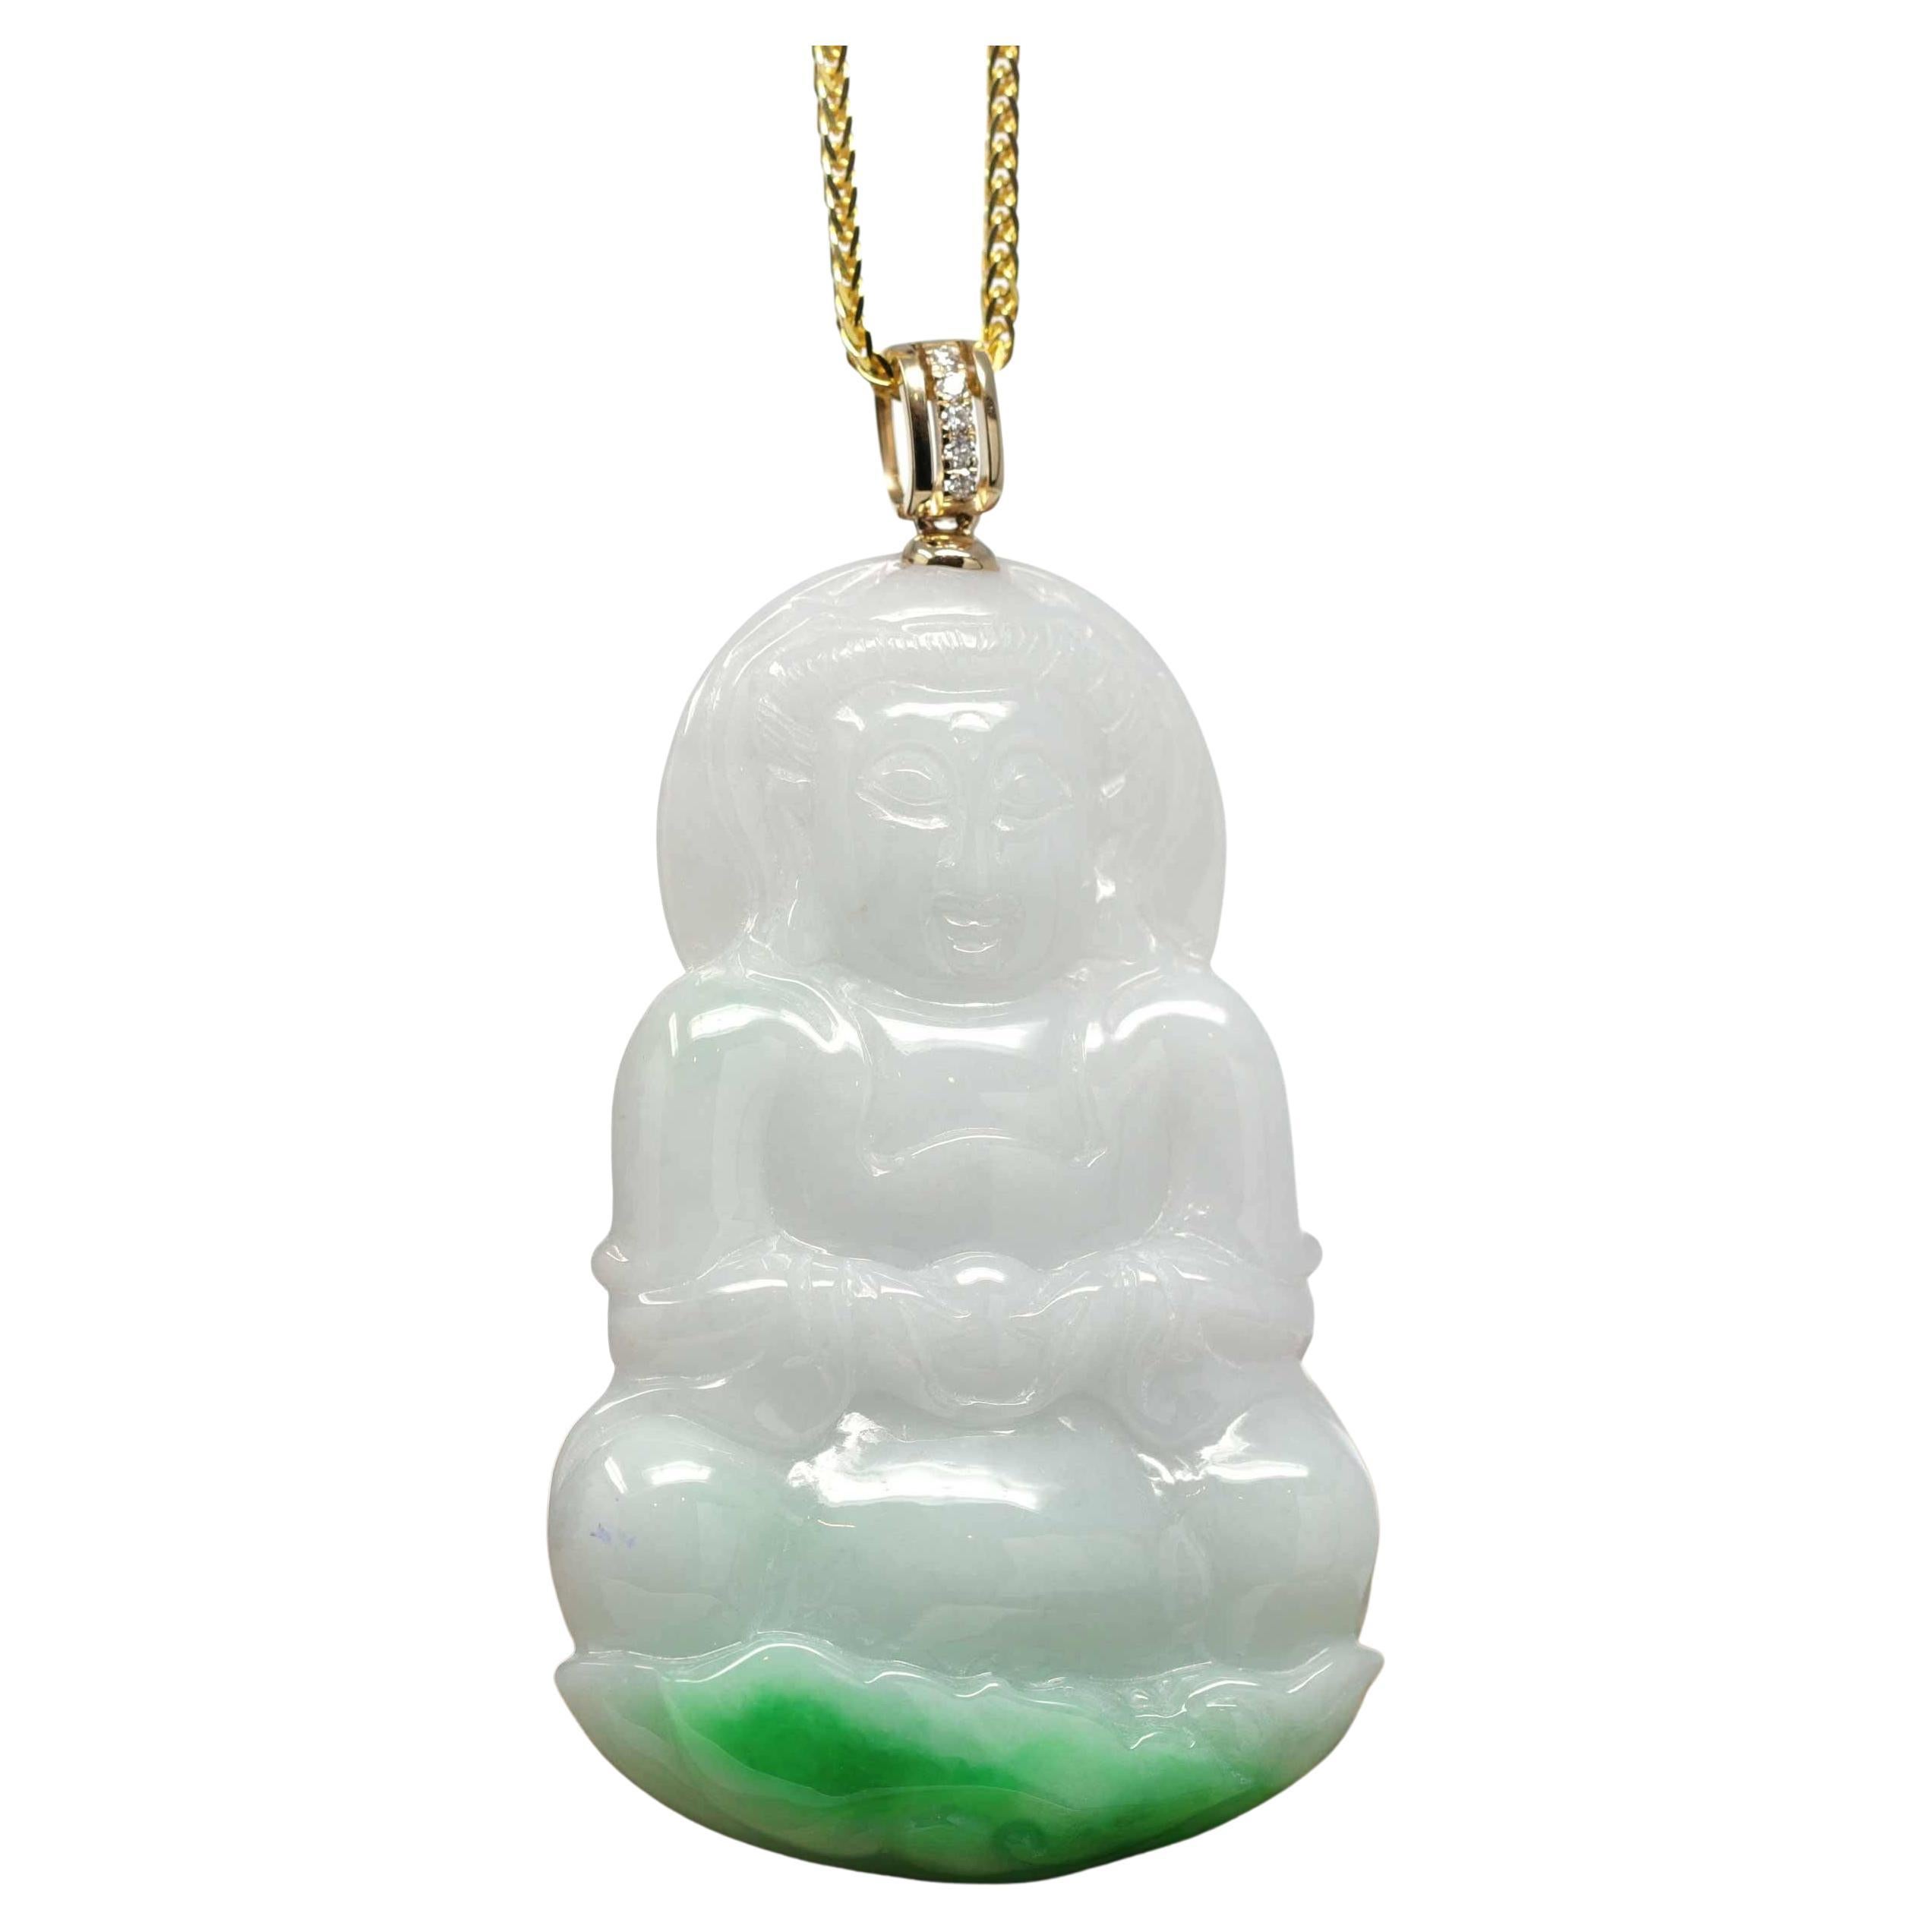 "Goddess of Compassion" Jadeite Jade Necklace with 14k Yellow Gold Diamond Bail 